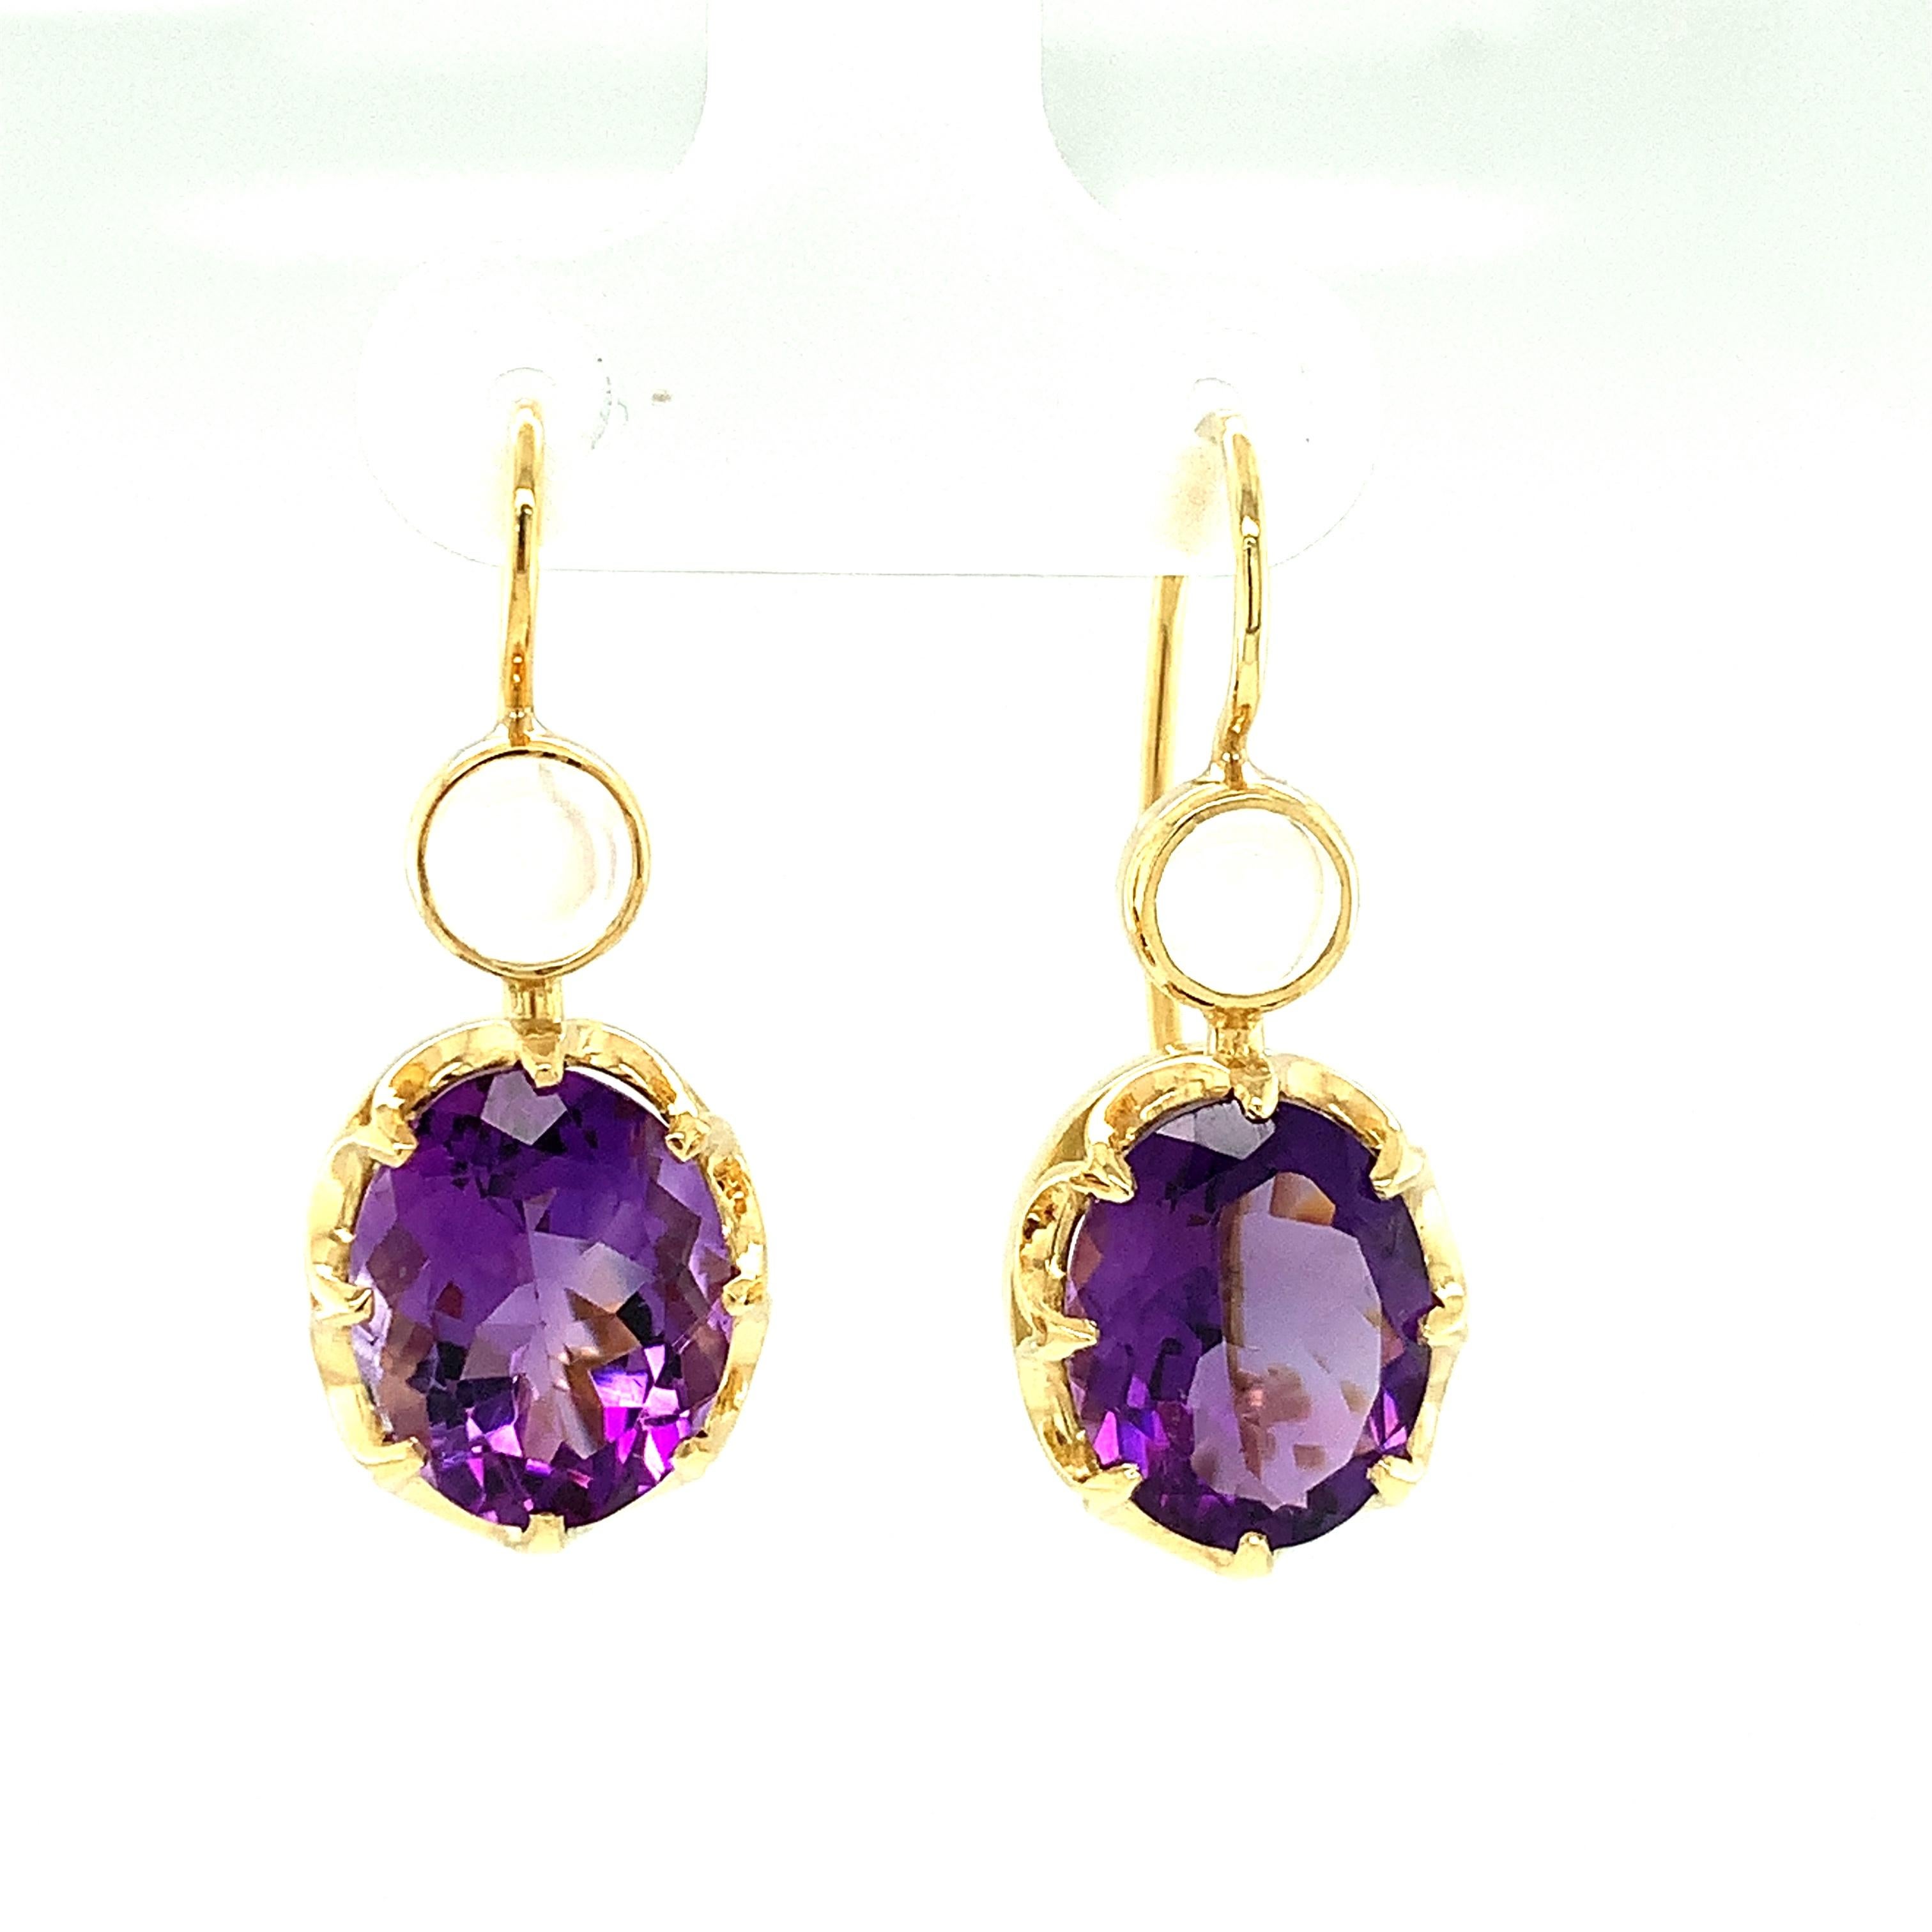 These beautiful earrings feature sparkling African amethysts and are perfect for special occasions, like everyday life! The amethysts have a rich, velvety, purple color, typical of African material. They are paired with round moonstones that glow